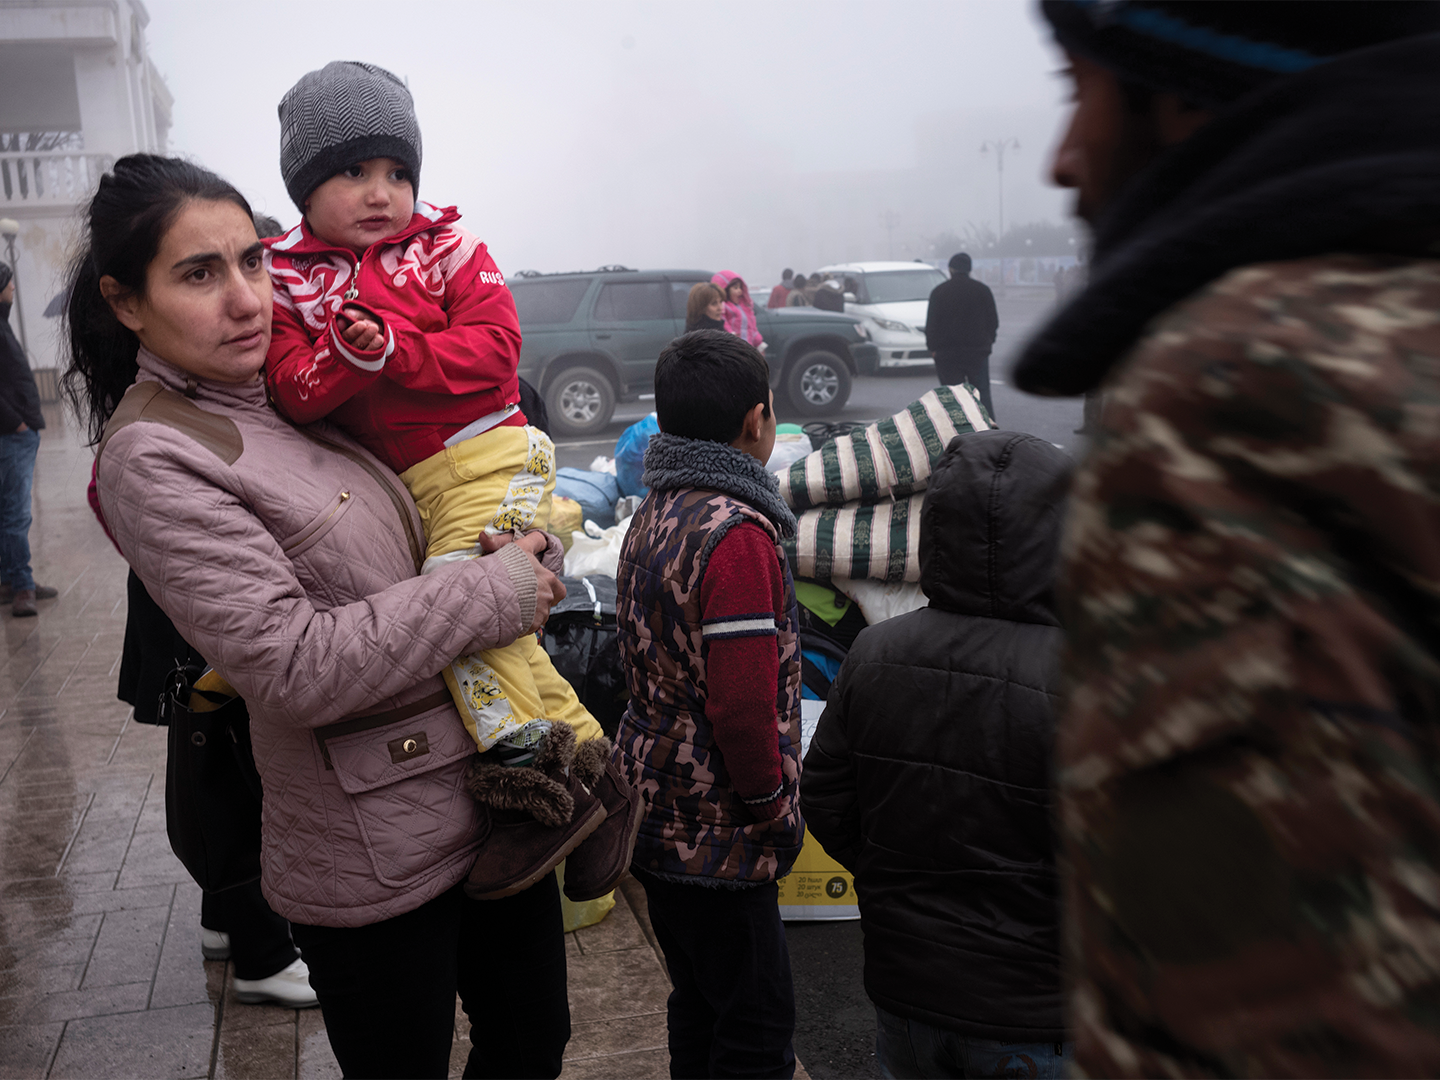 Narine Boghossyan holds her son, three and a half year old Armen Haroutunyan as they and her five other children wait in the freezing cold for a ride back to their home.